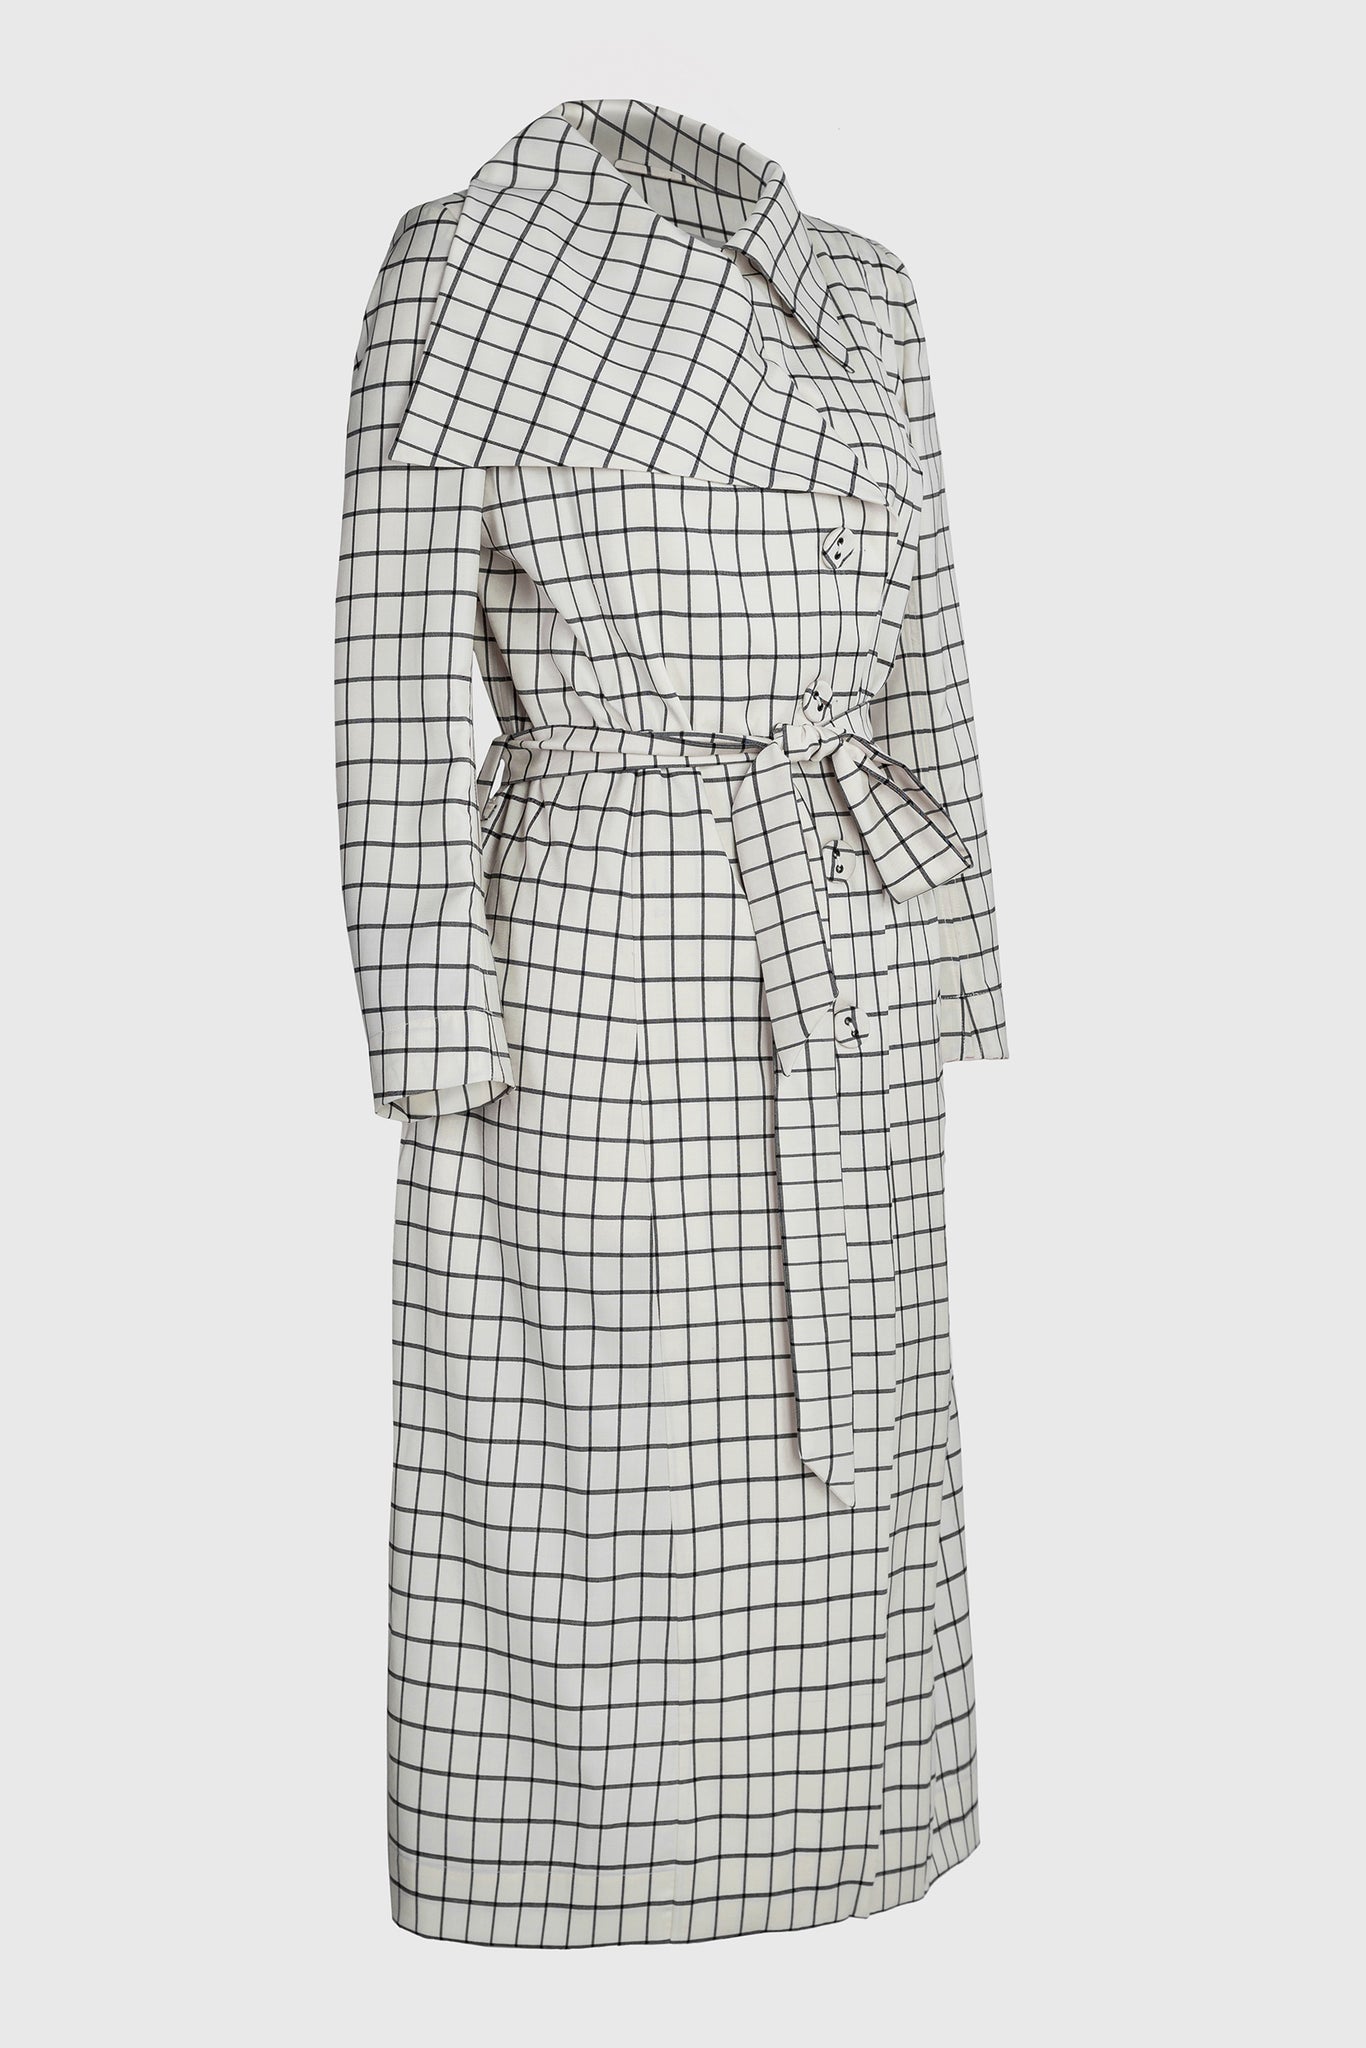 Fun to wear, classy tailored trench coat, below the knee, silhouette enhancing, waist fastening strap, grid pattern, seamless matching on different sides, expressionistic, elegant style, long sleeves, young look